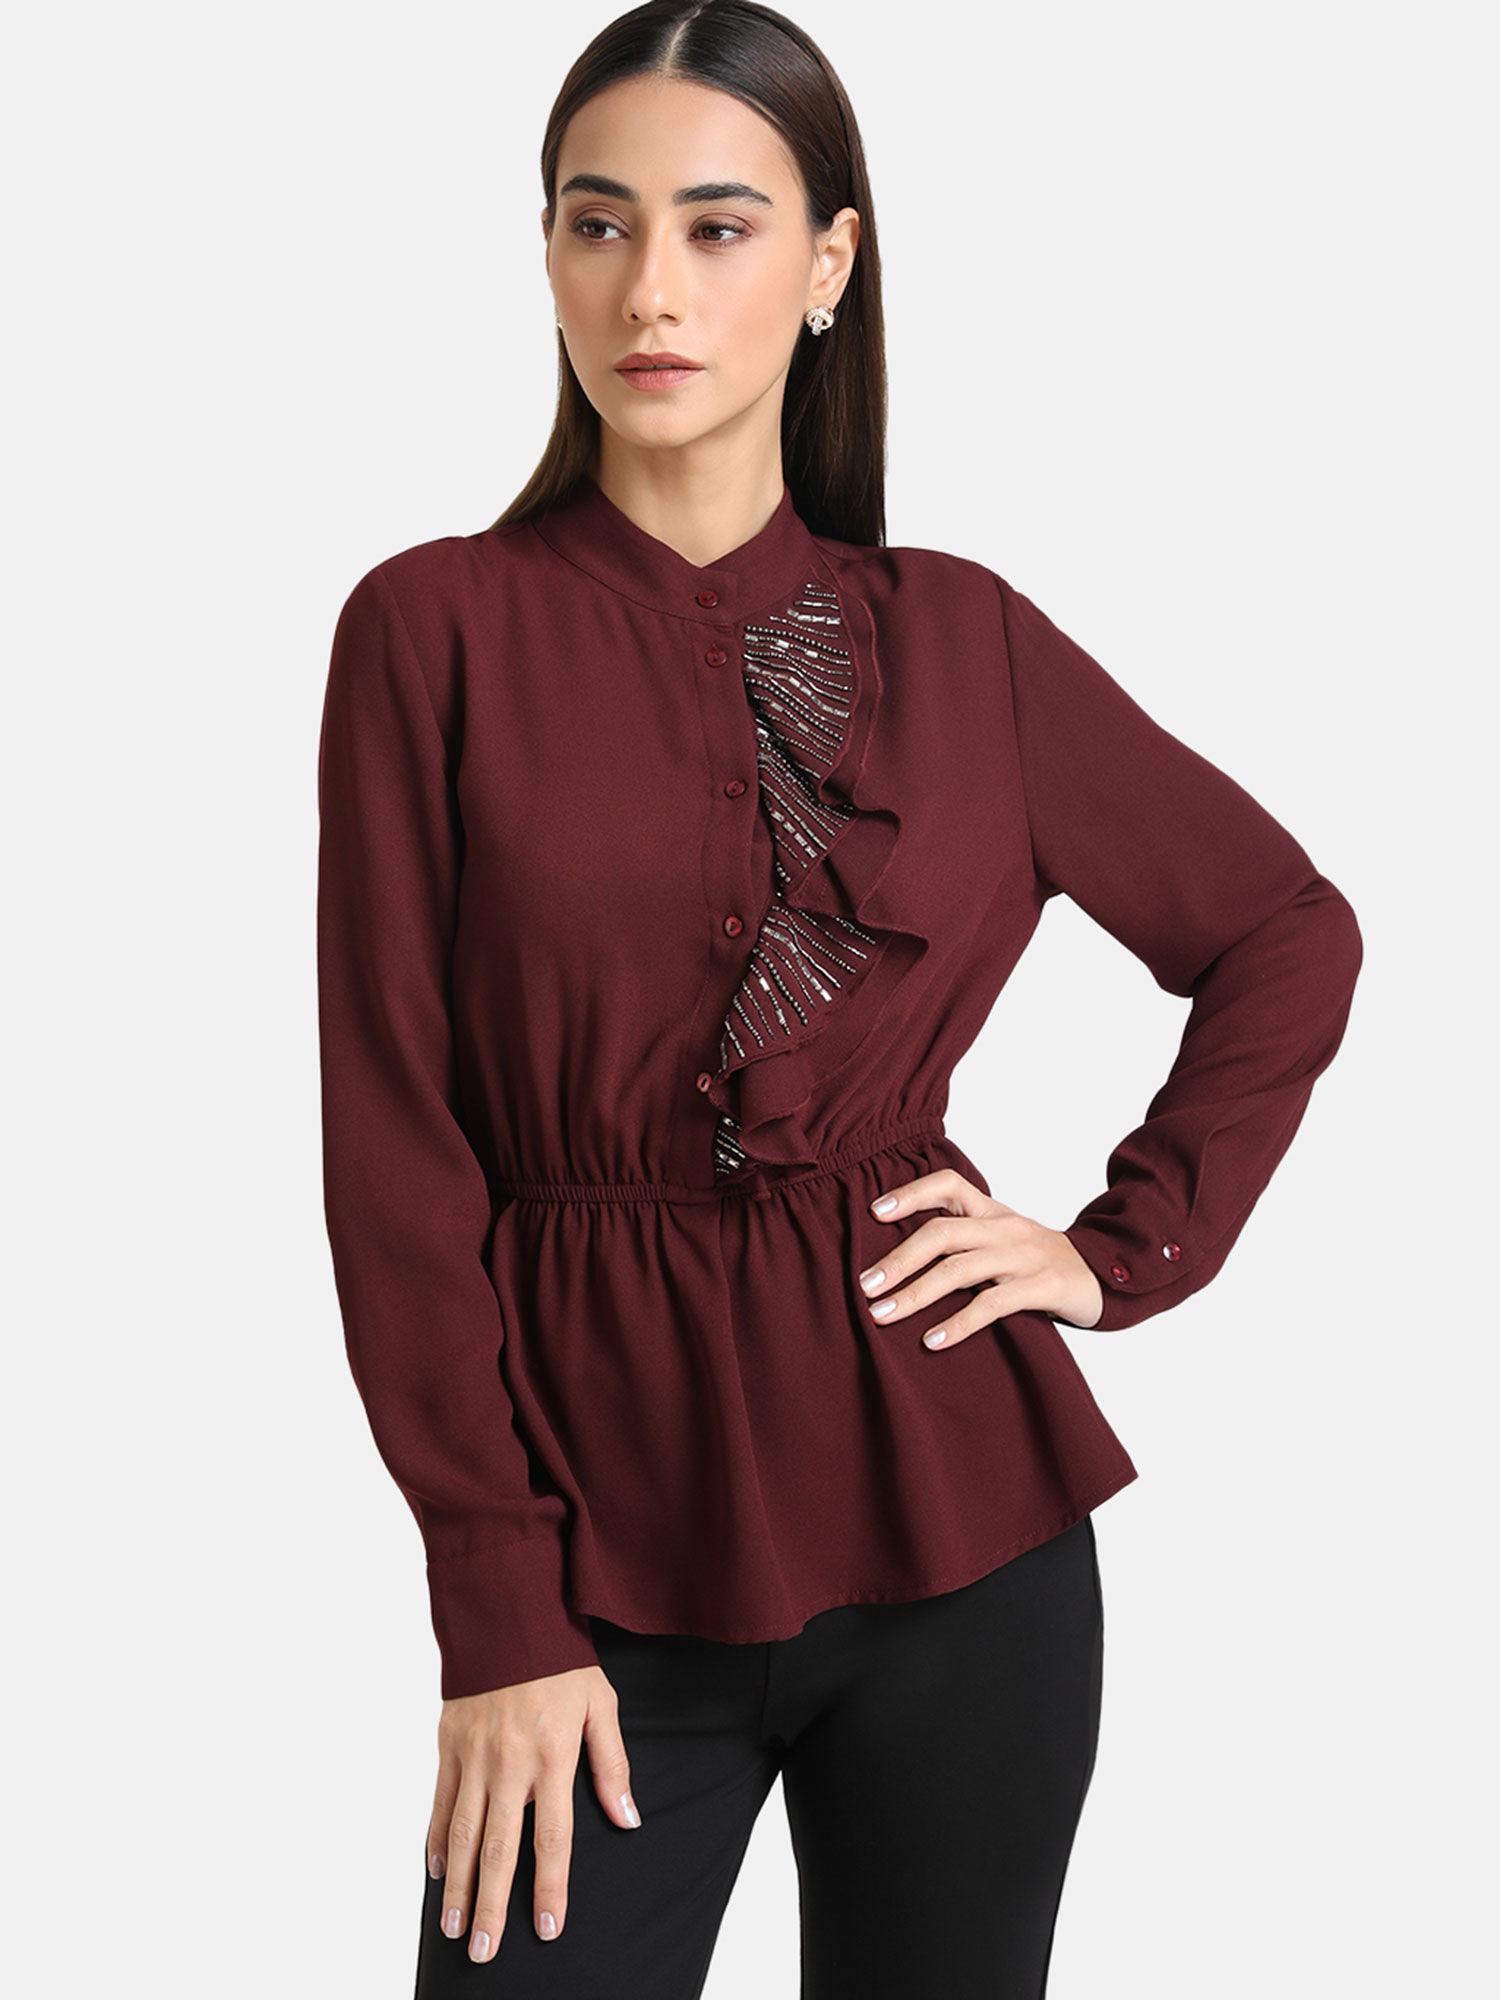 maroon top with embellished ruffle